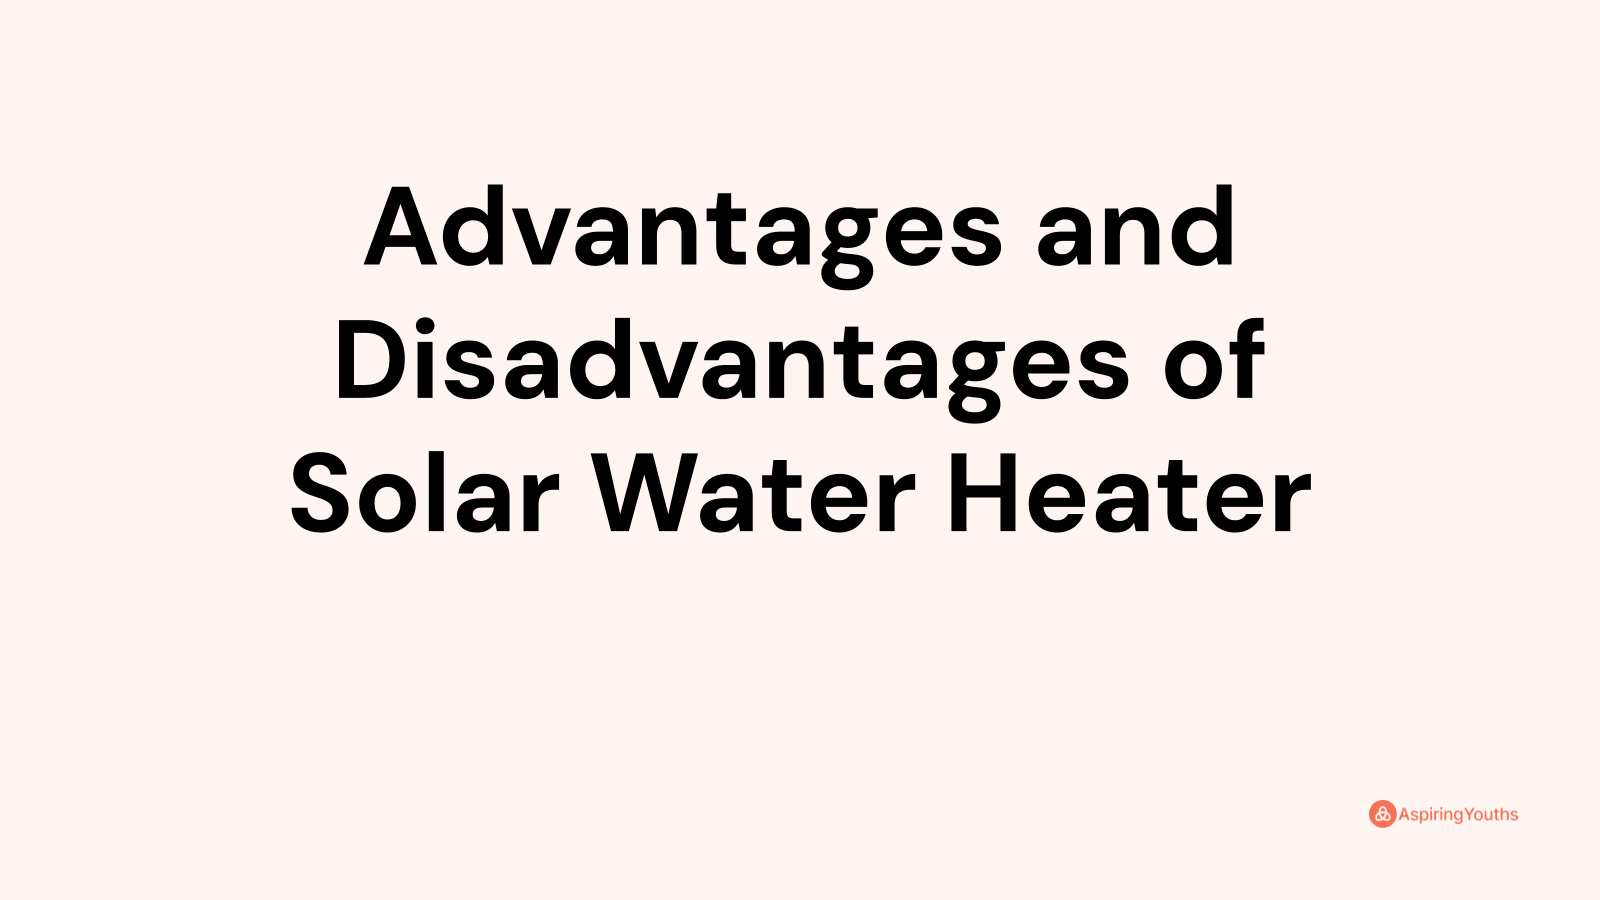 Advantages and disadvantages of Solar Water Heater